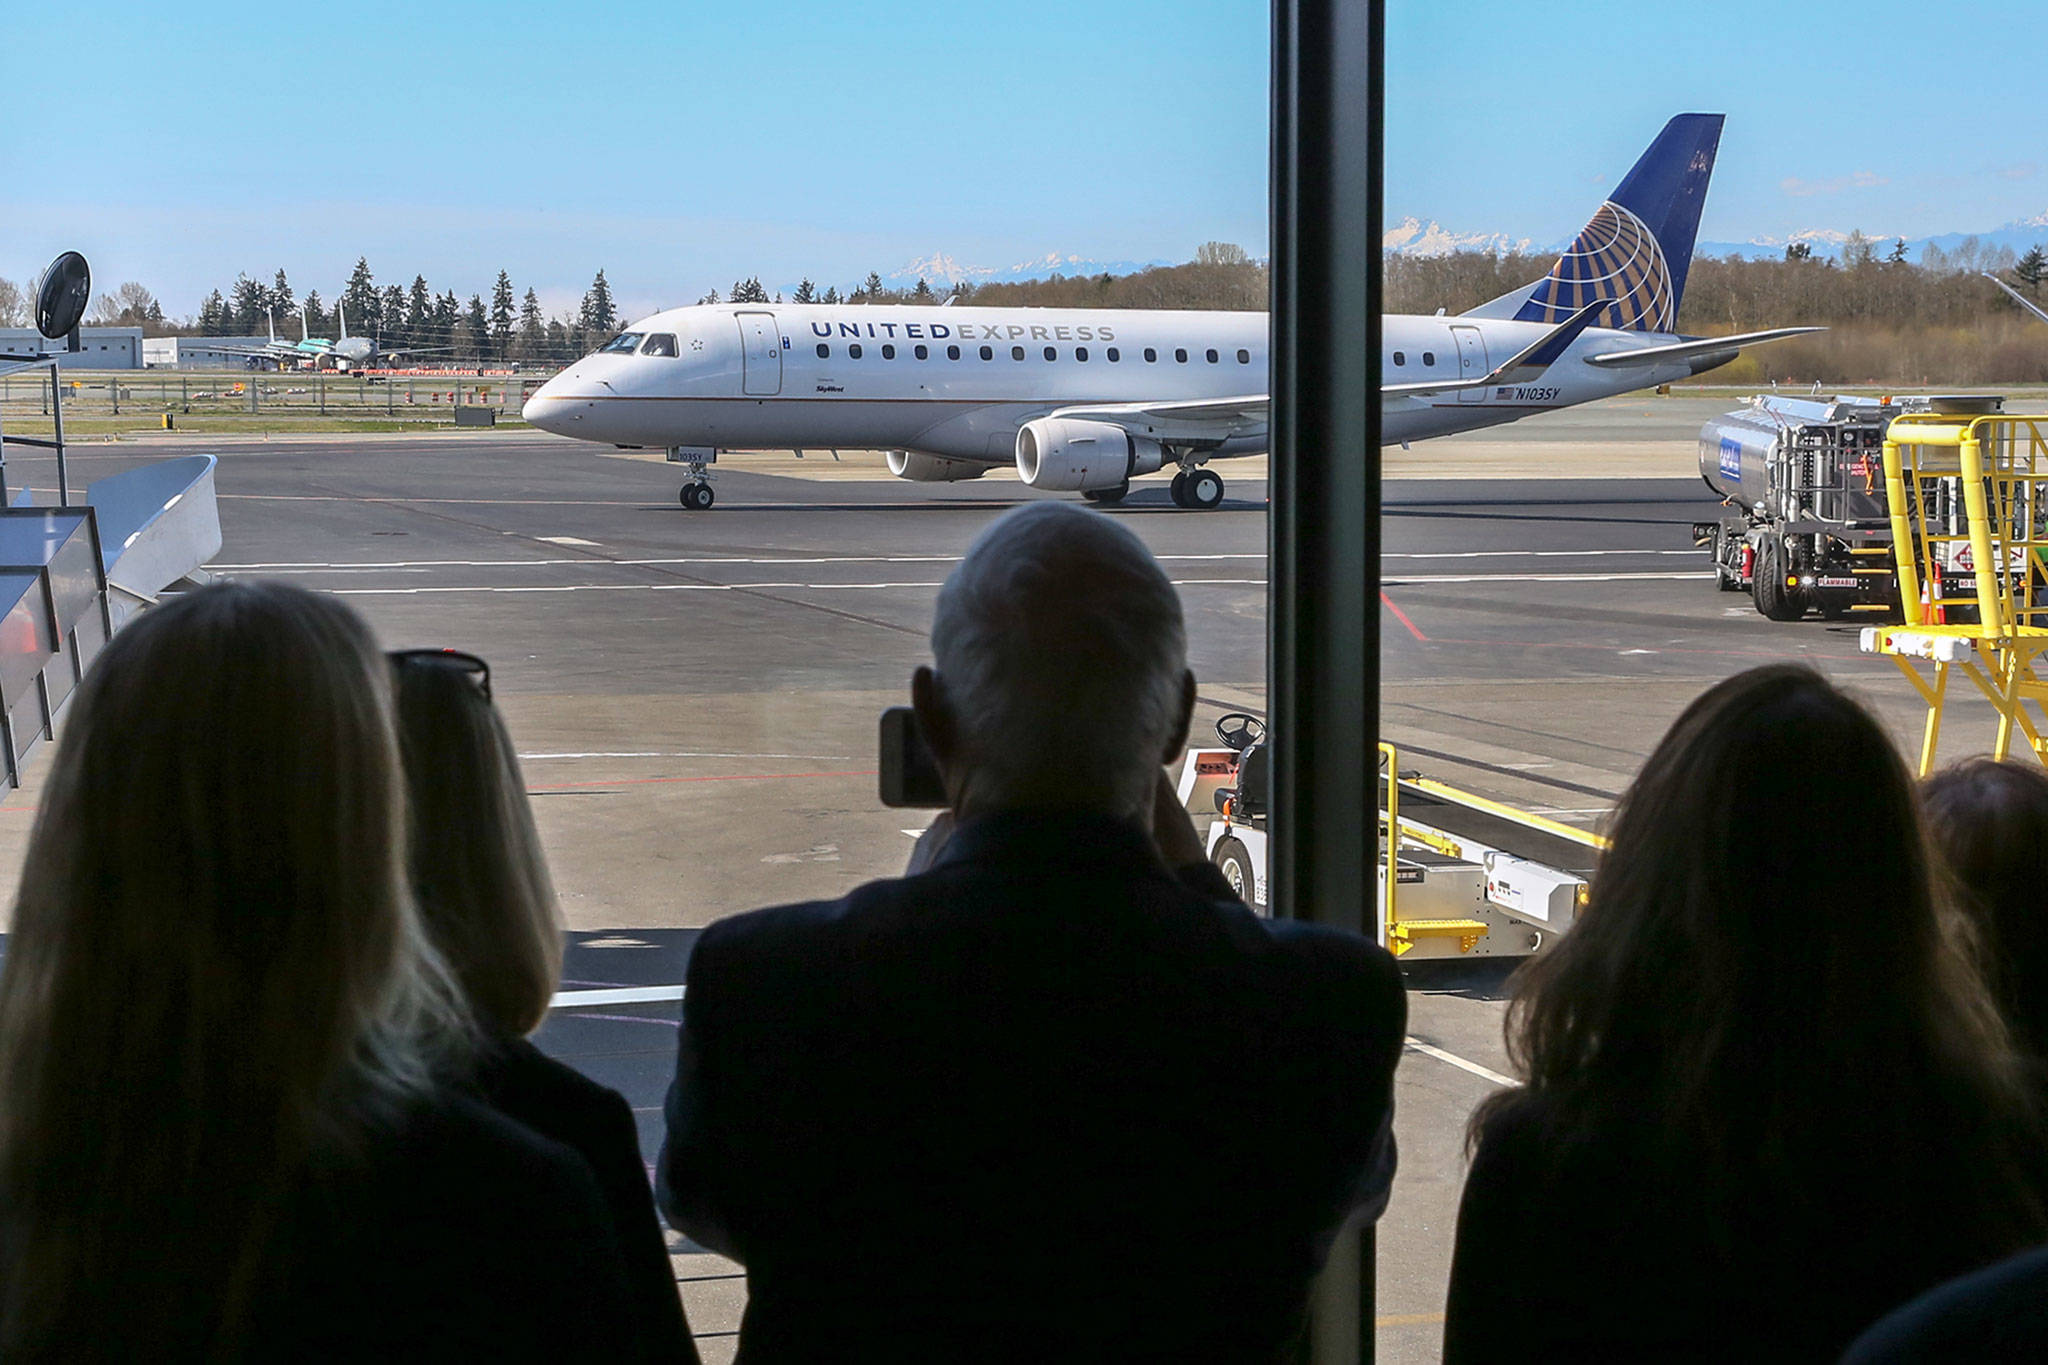 The first United Airlines flight serving Paine Field in Everett taxis to the gate last March 31. (Kevin Clark / The Herald)